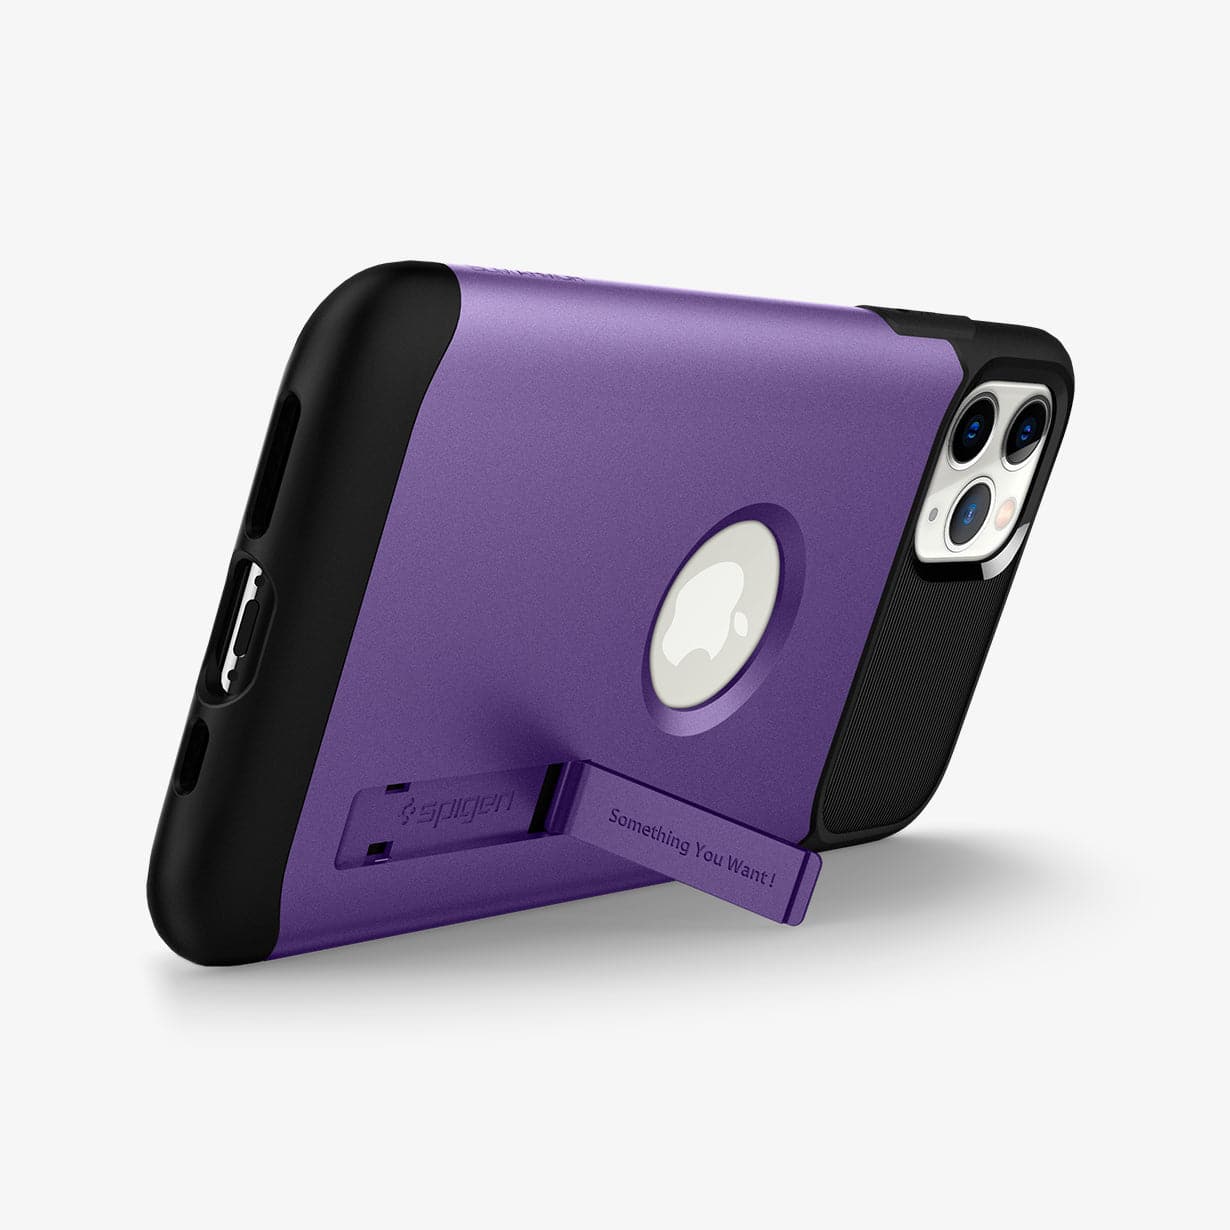 077CS27110 - iPhone 11 Pro Case Slim Armor in purple showing the device propped up horizontally by built in kickstand